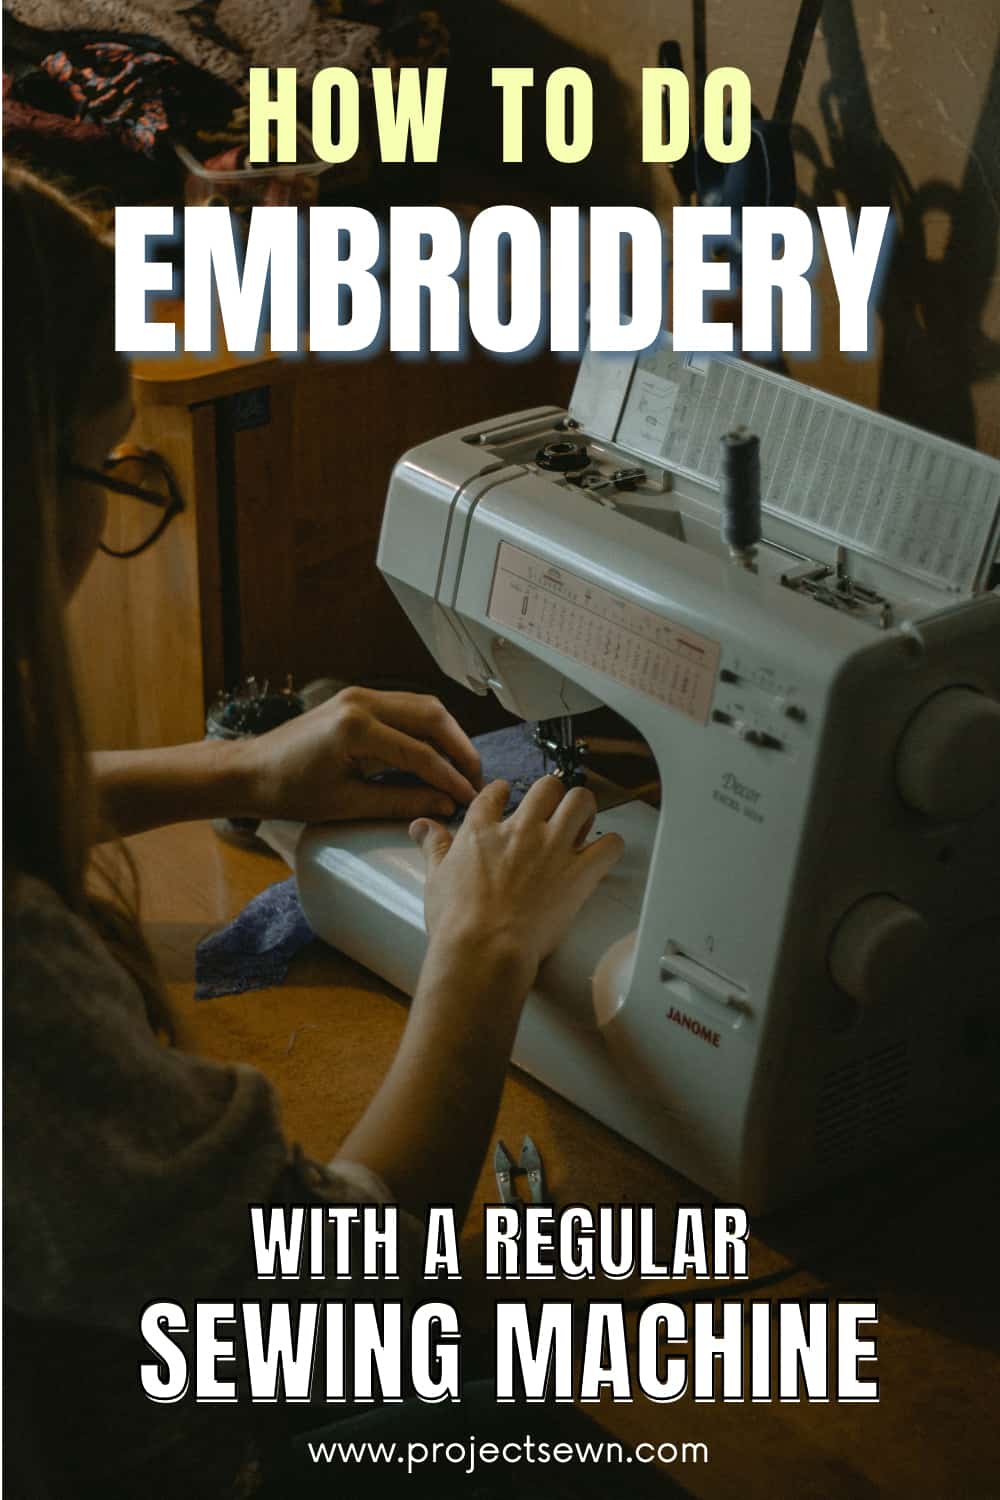 Embroidery Sewing Machine